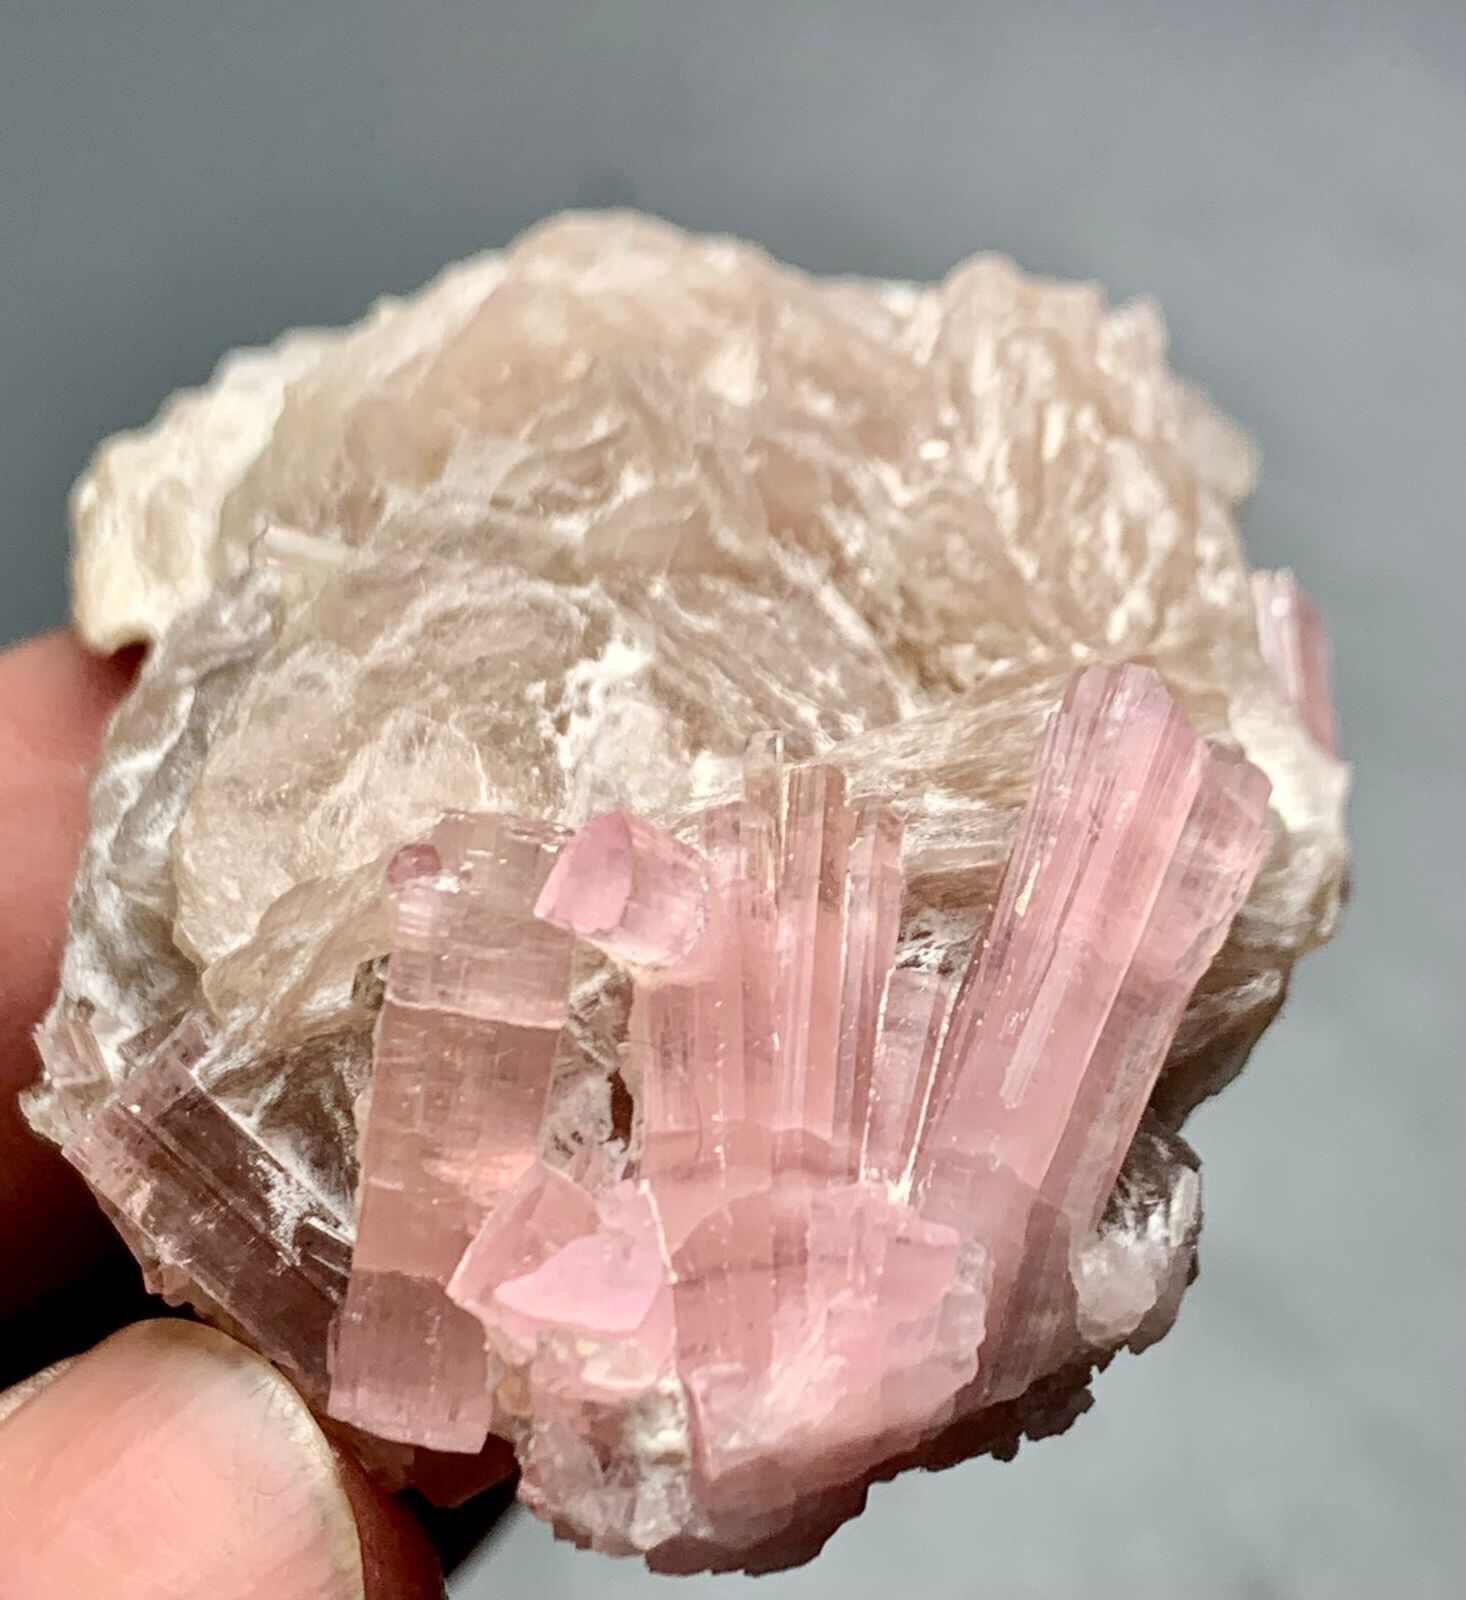 250 Cts  Top Quality Pink Tourmaline Crystals Bunch Specimen from Afghanistan